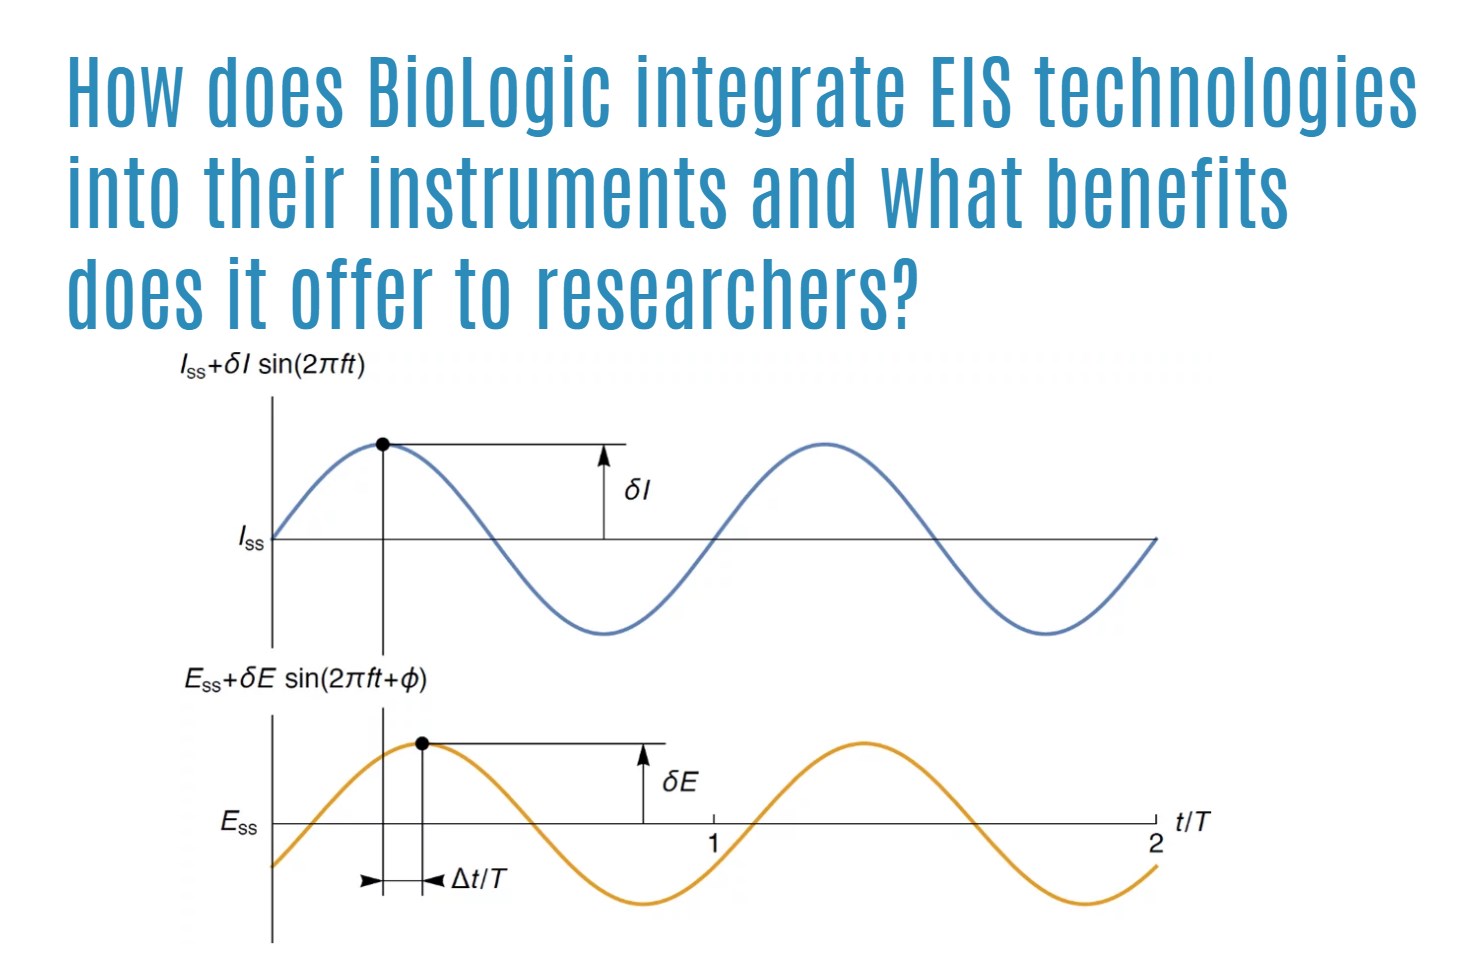 How does BioLogic integrate EIS technologies into their instruments and what benefits does it offer to researchers?